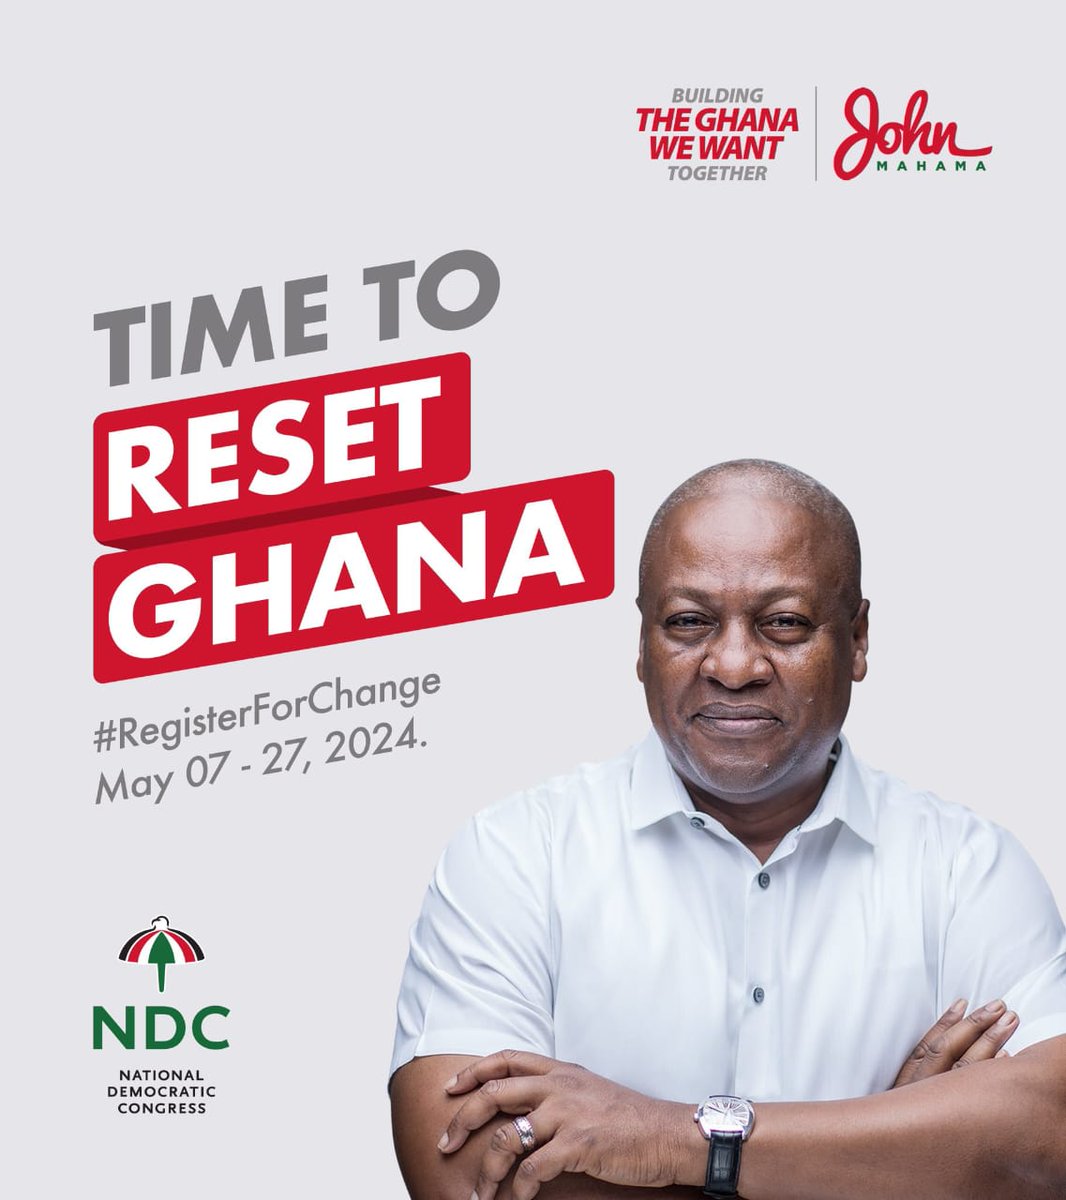 Do you want to see real CHANGE in Ghana? Do you want to help build the Ghana we all want? 

Then you must register with the Electoral Commission if you are not yet a registered voter.